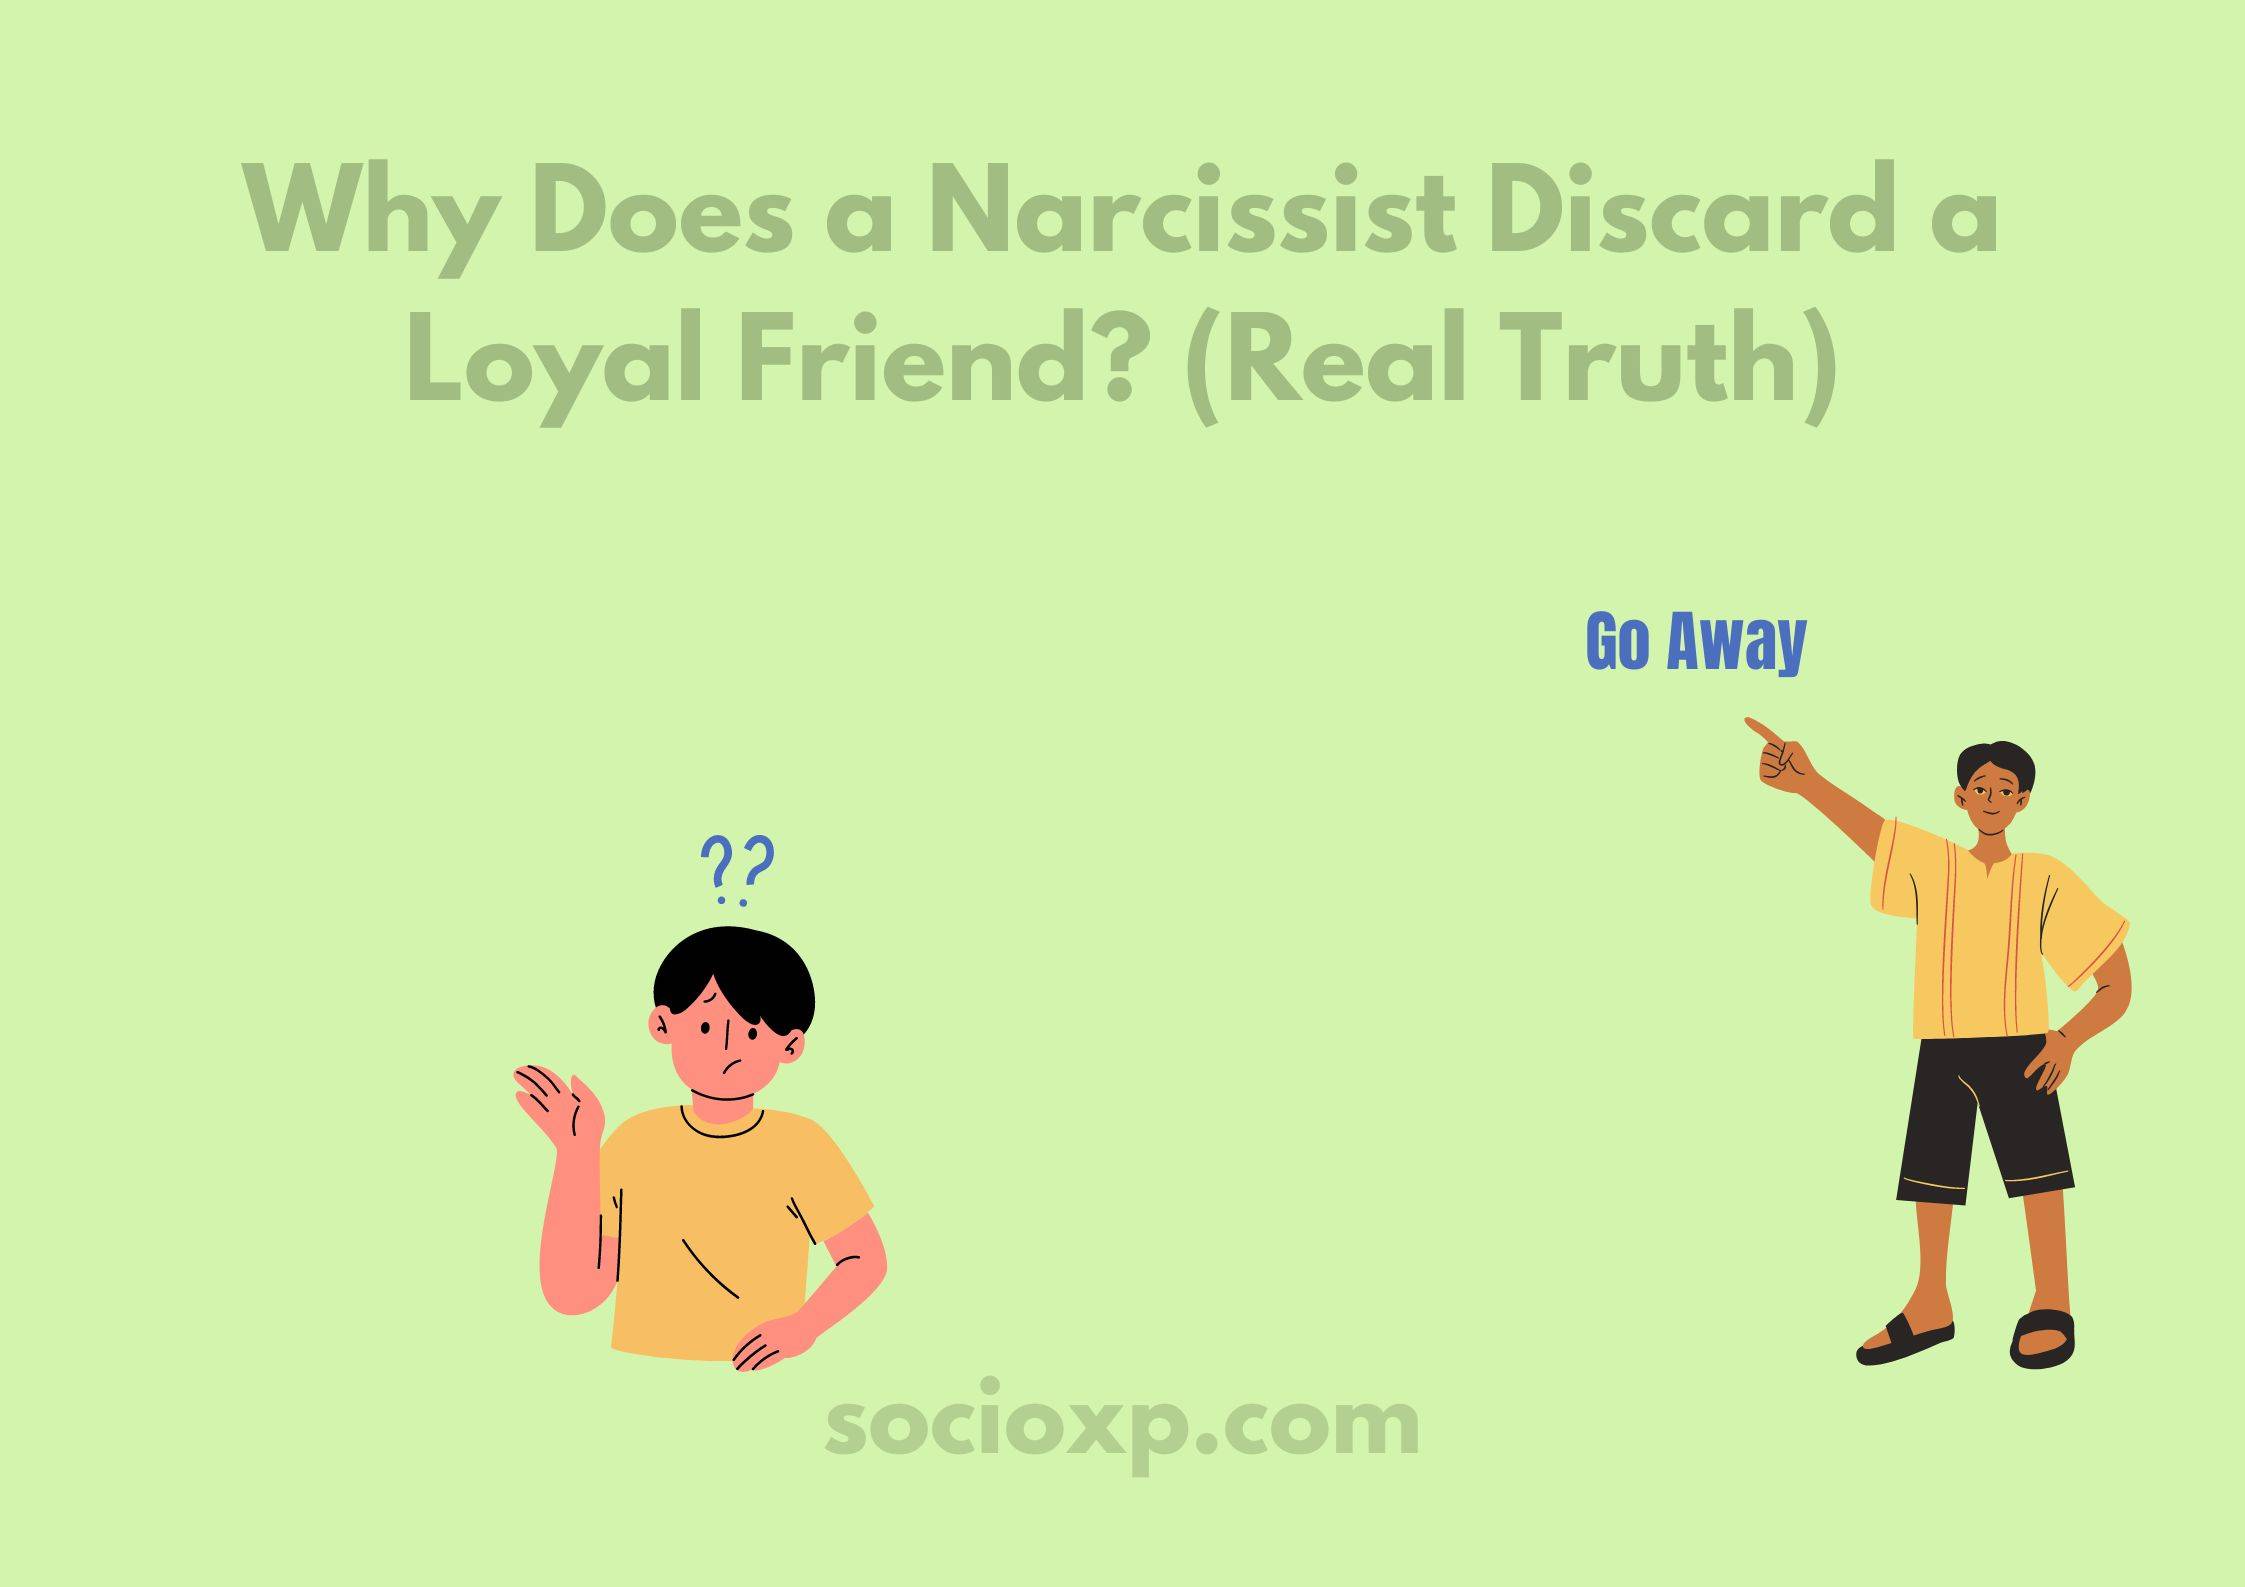 Why Does a Narcissist Discard a Loyal Friend? (Real Truth)